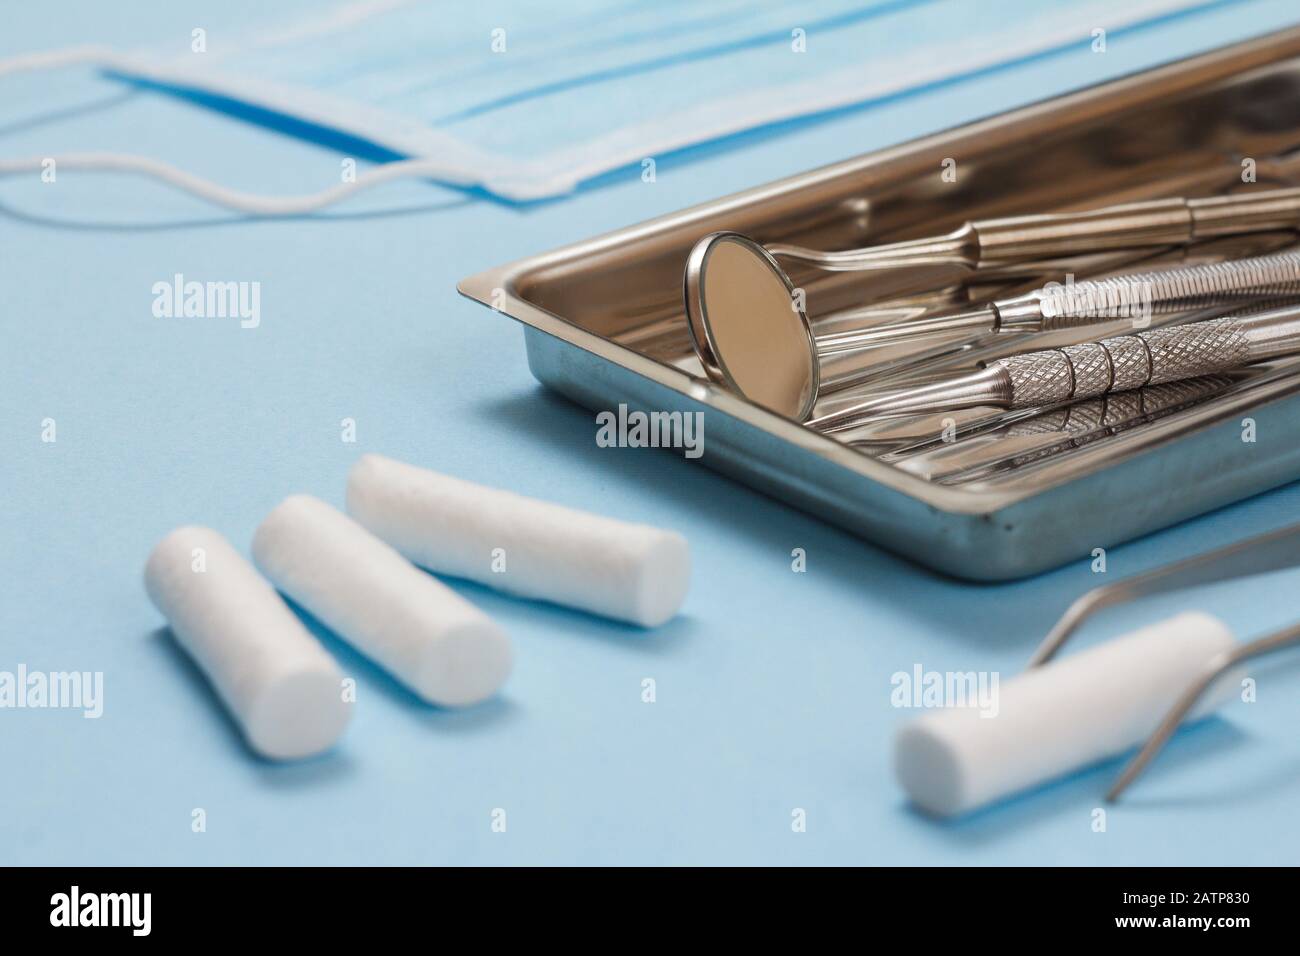 Set of dental instruments for dental treatment. Medical tools in stainless steel tray, protective mask and cotton tampons. Close-up view. Shallow dept Stock Photo